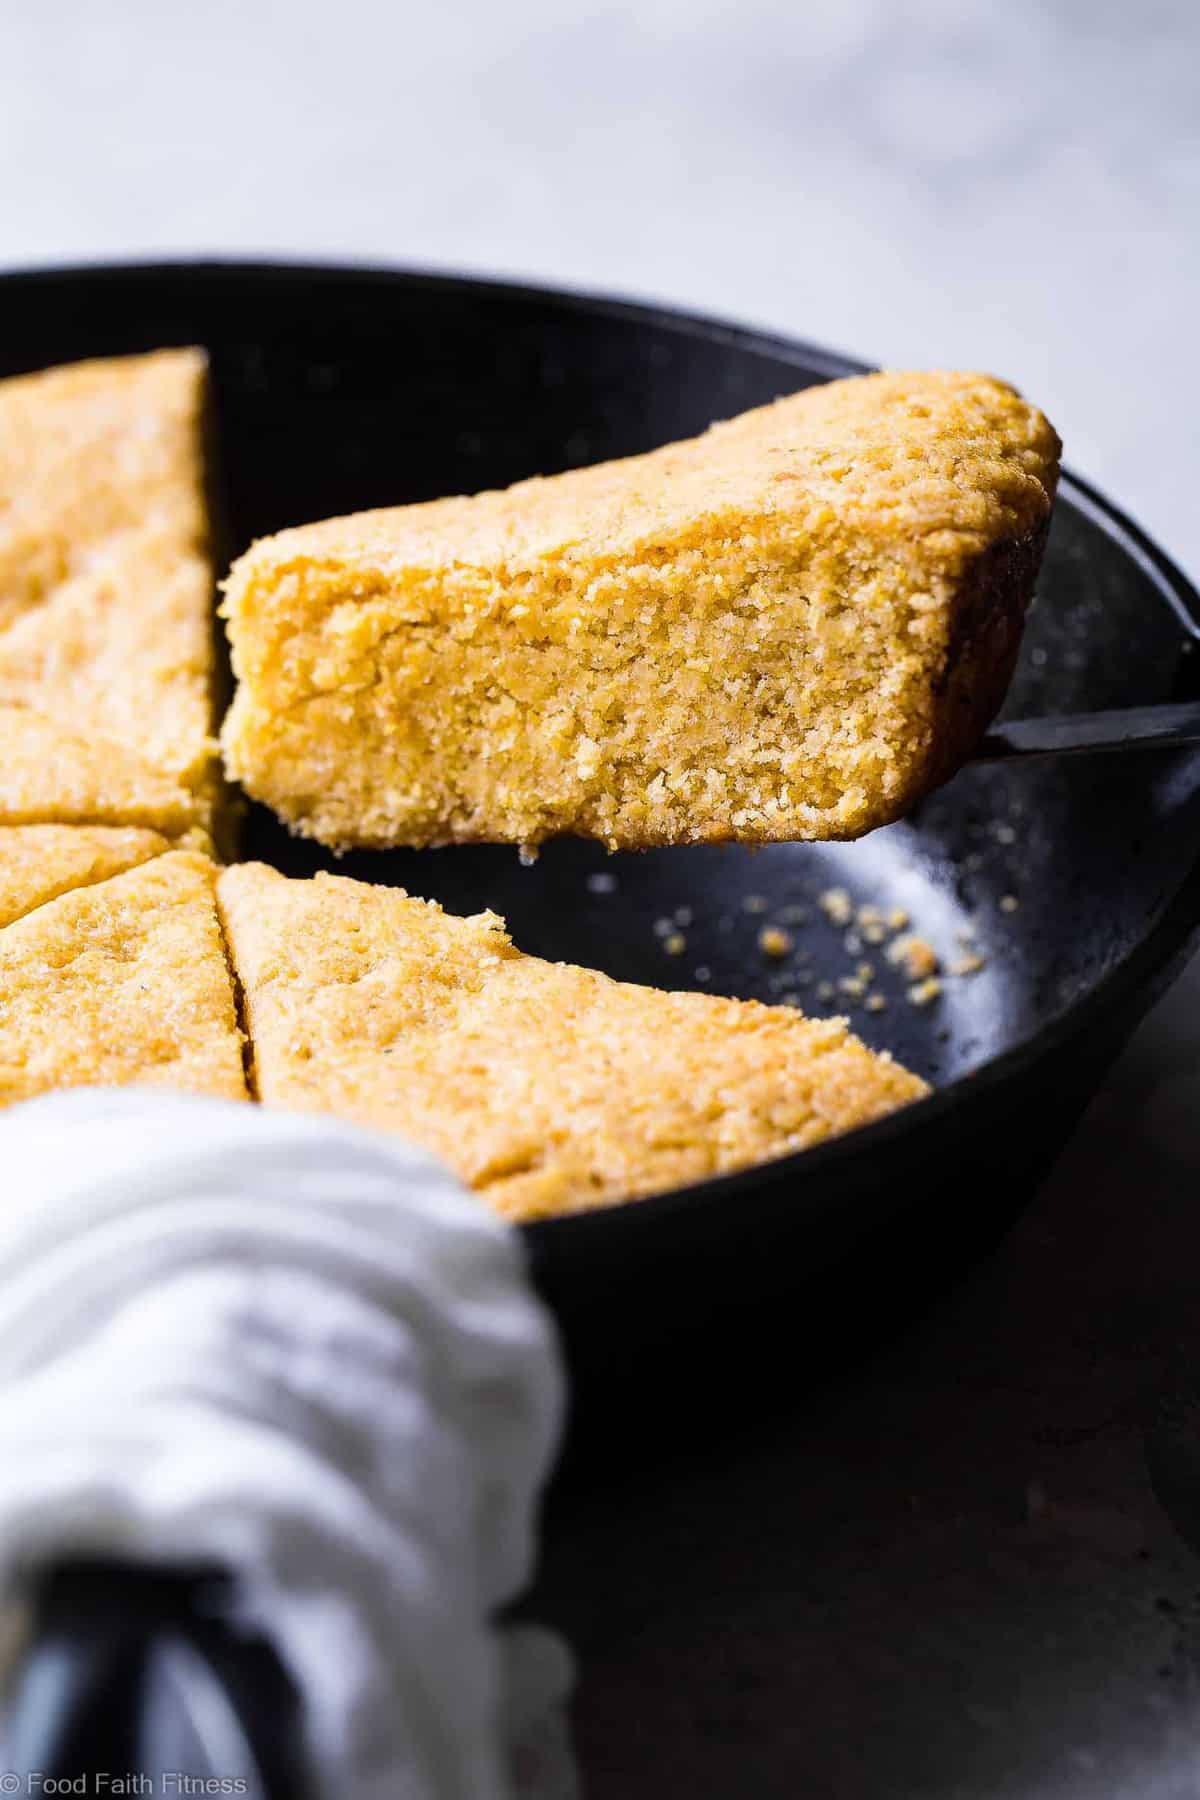 Easy Sweet Vegan Cornbread with Applesauce - This is the BEST gluten free, dairy free, egg free and vegan cornbread recipe! It's perfectly sweet, dense and SO chewy, you will never believe it's healthy and SO easy to make! | #Foodfaithfitness | #Glutenfree #Vegan #Dairyfree #Eggfree #Cornbread